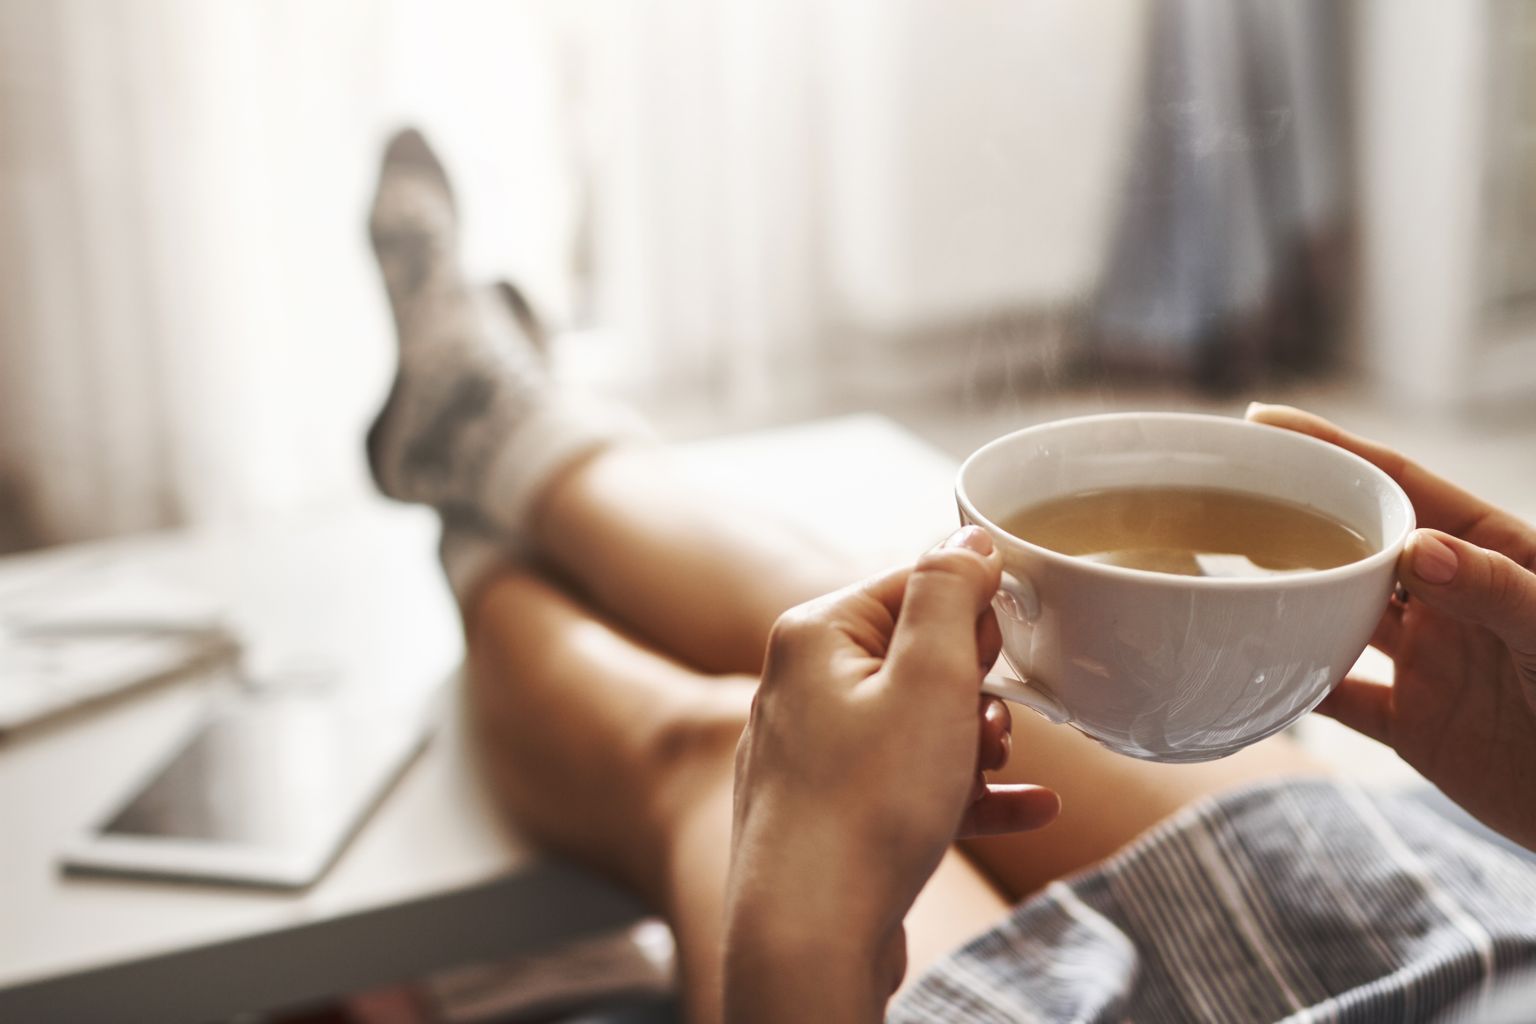 Cup of tea and chill. Woman lying on couch, holding legs on coffee table, drinking hot coffee and enjoying morning, being in dreamy and relaxed mood. Girl in oversized shirt takes break at home